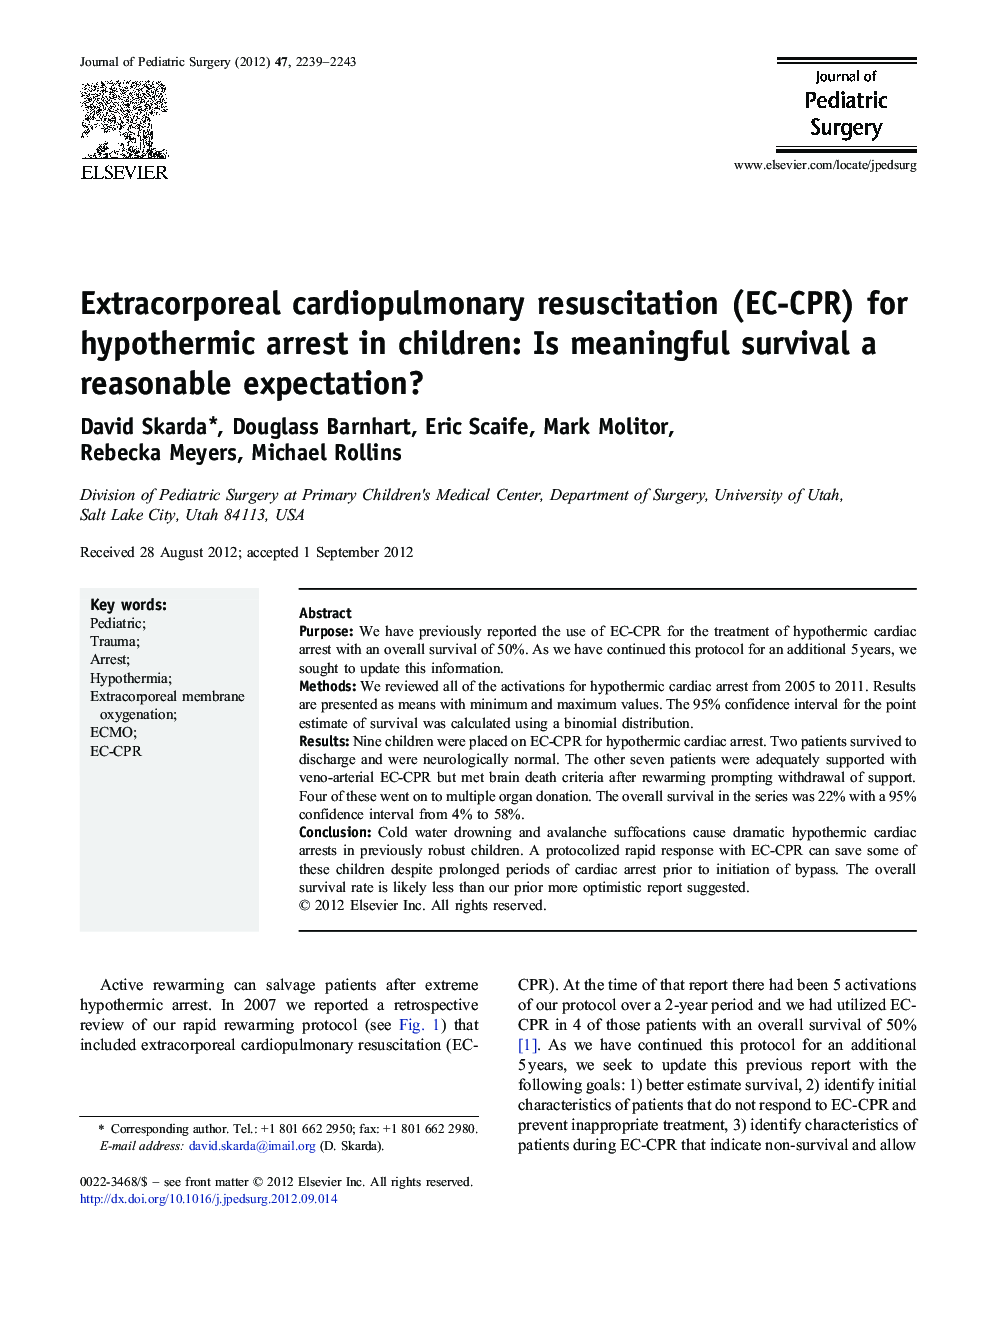 Extracorporeal cardiopulmonary resuscitation (EC-CPR) for hypothermic arrest in children: Is meaningful survival a reasonable expectation?